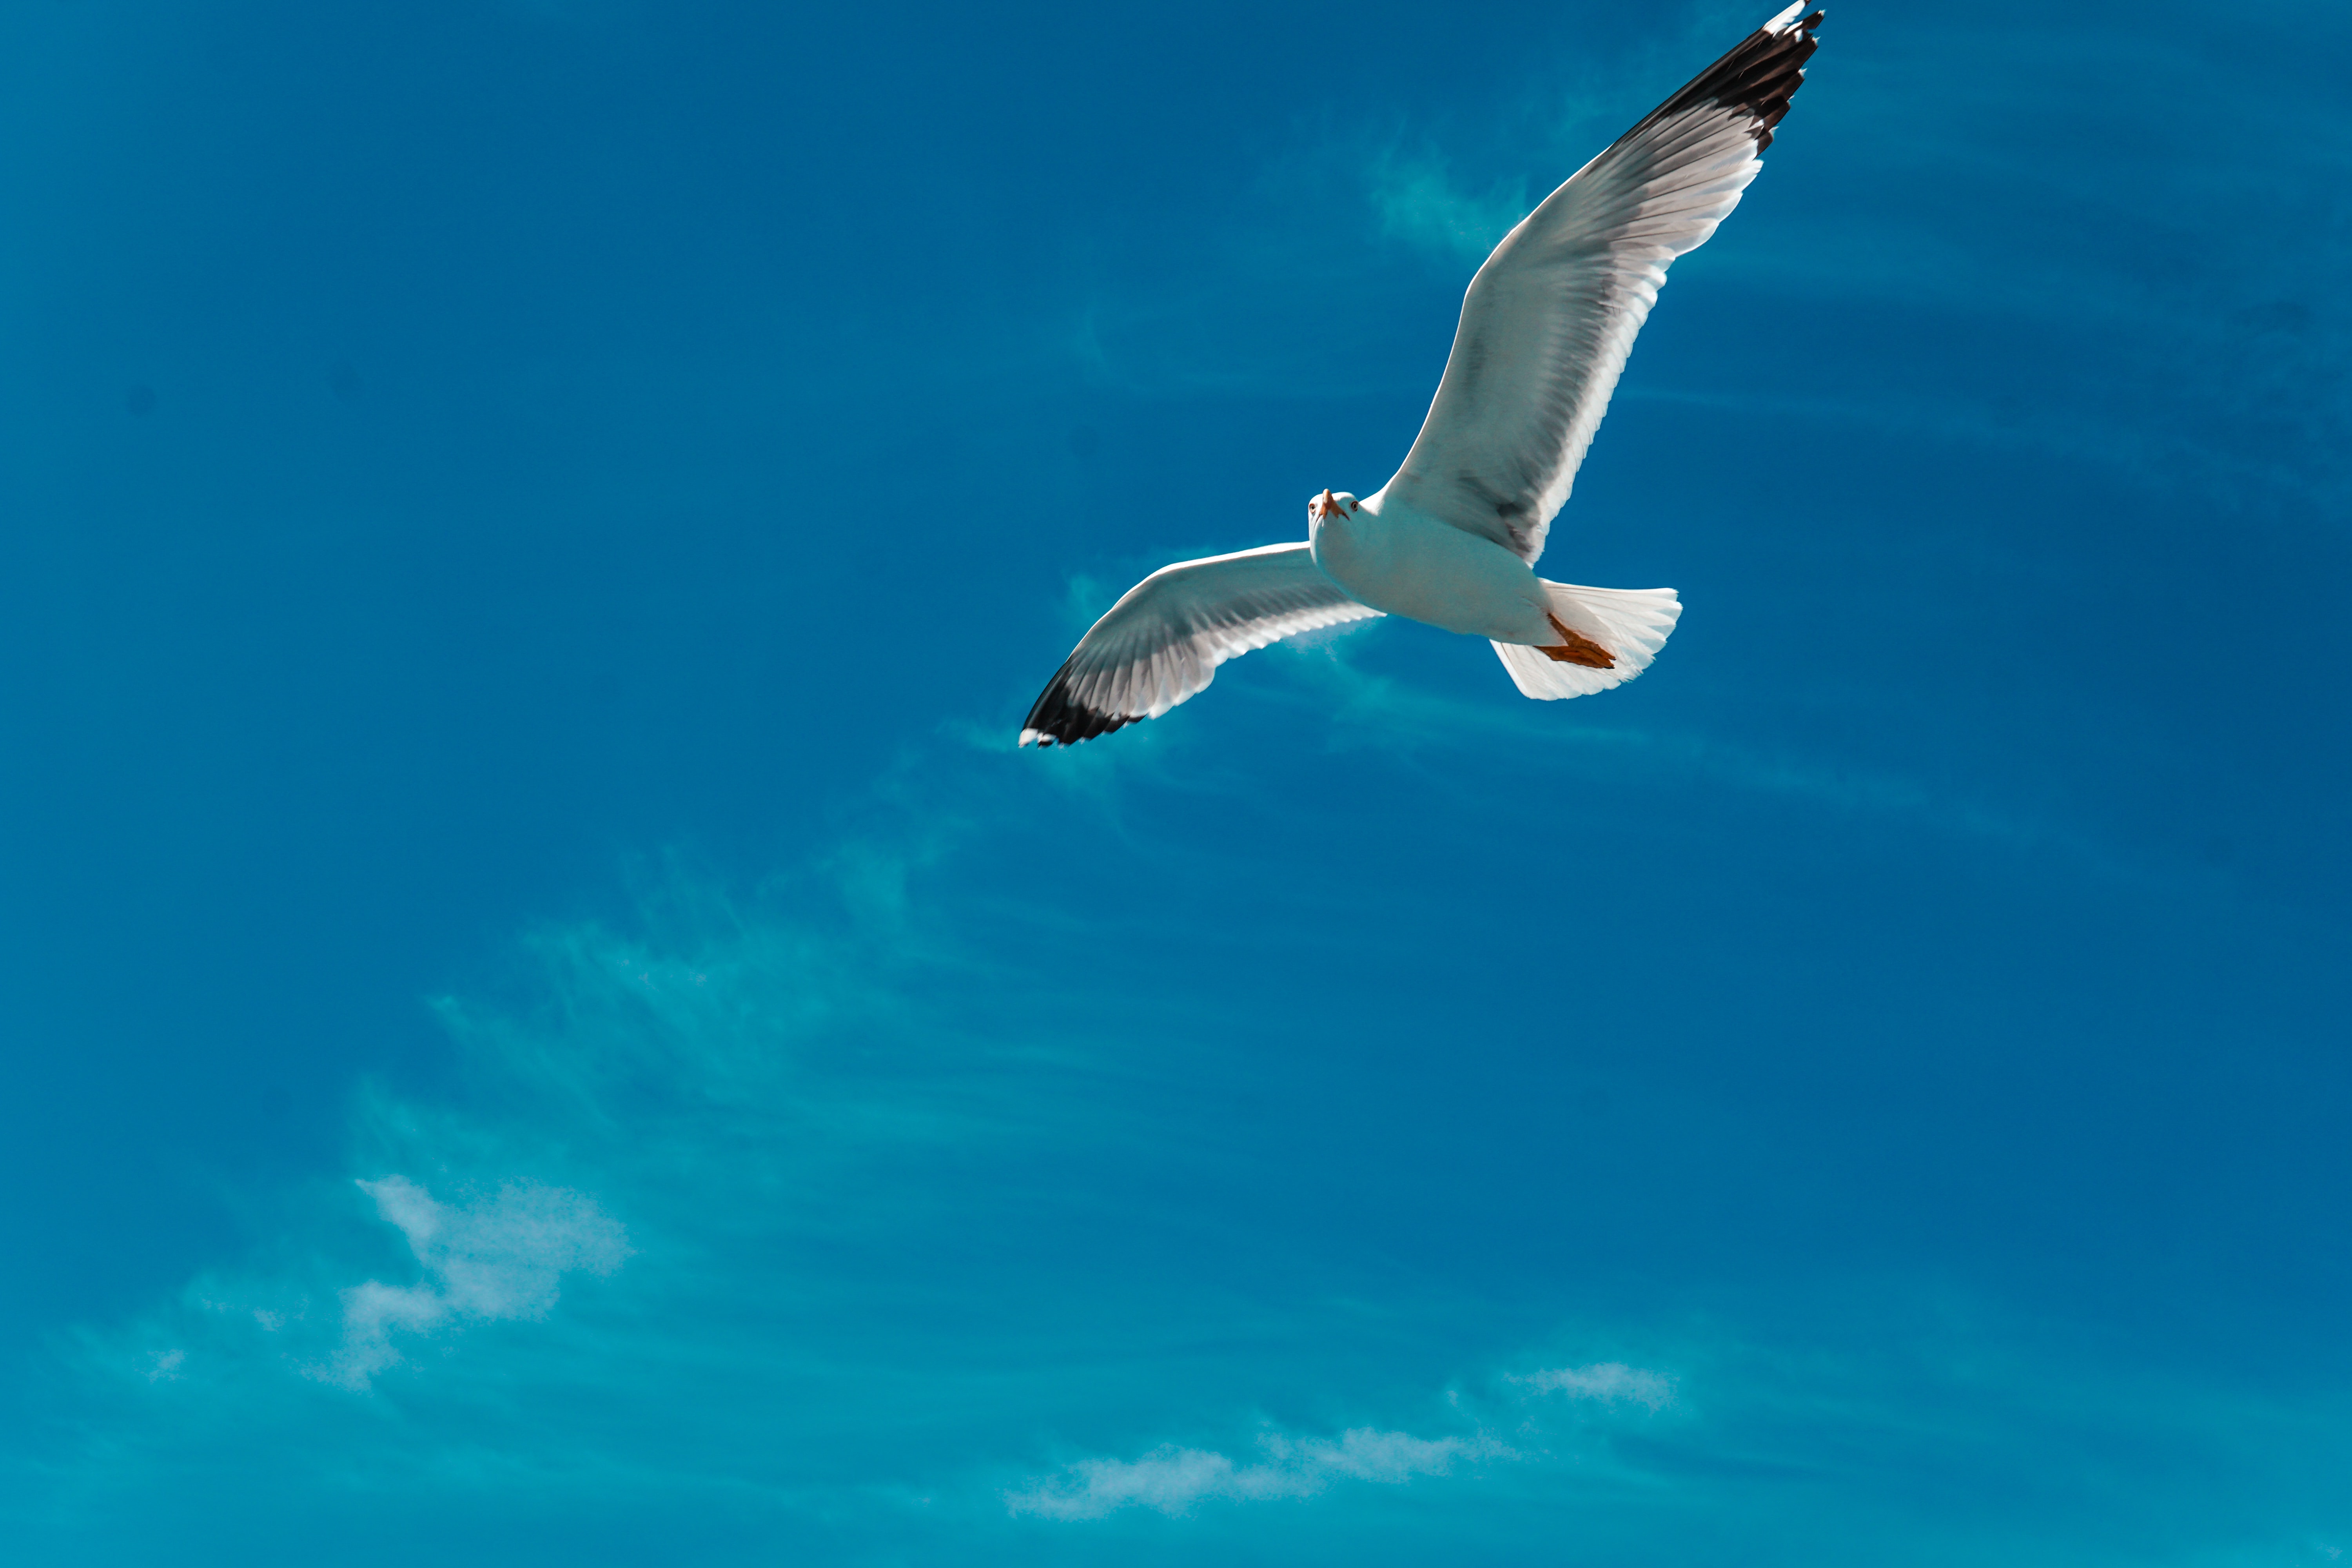 Cool Wallpapers animals, sky, clouds, bird, flight, gull, seagull, wings